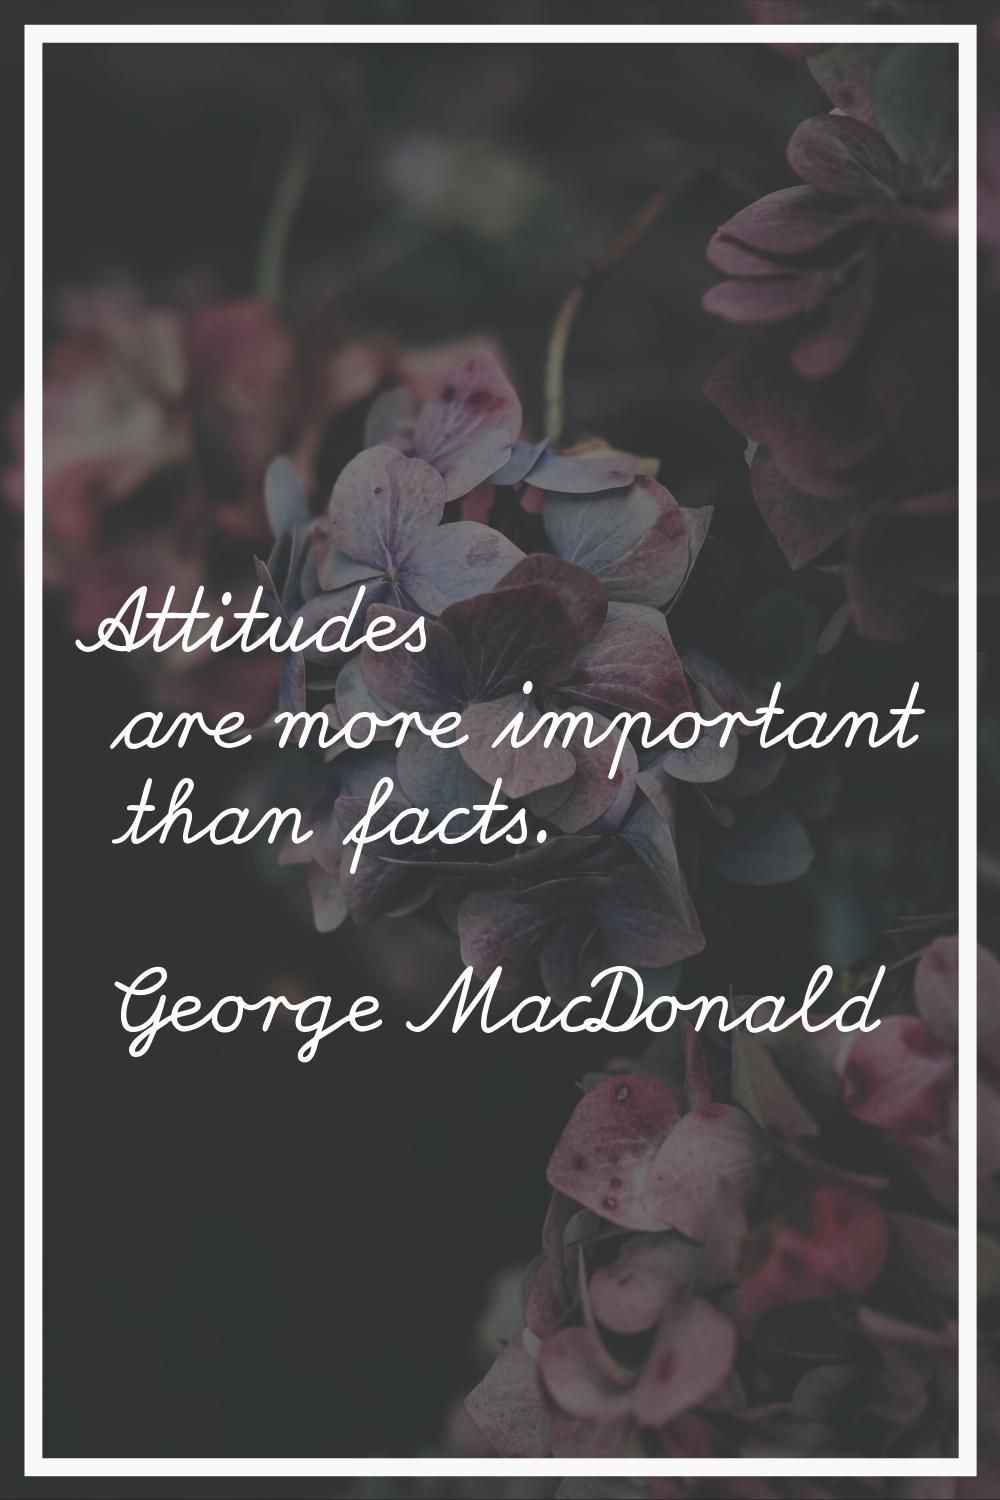 Attitudes are more important than facts.